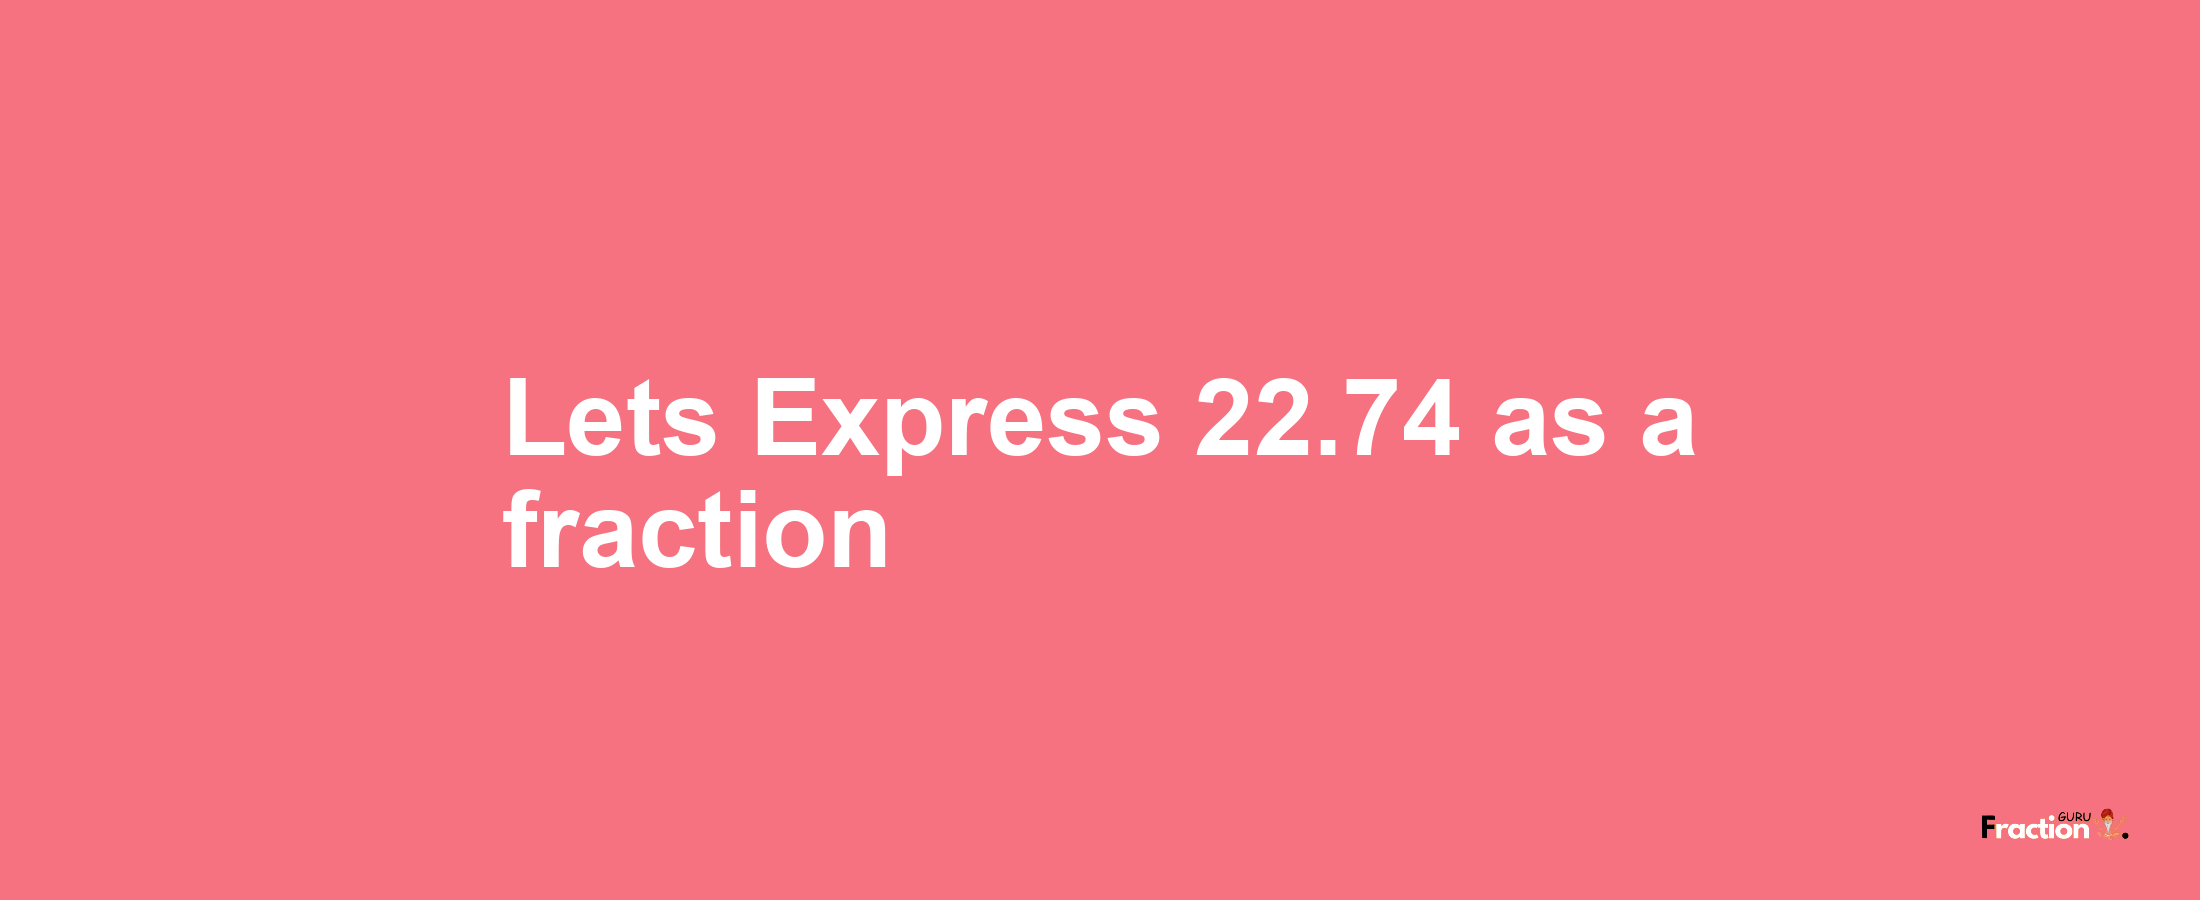 Lets Express 22.74 as afraction